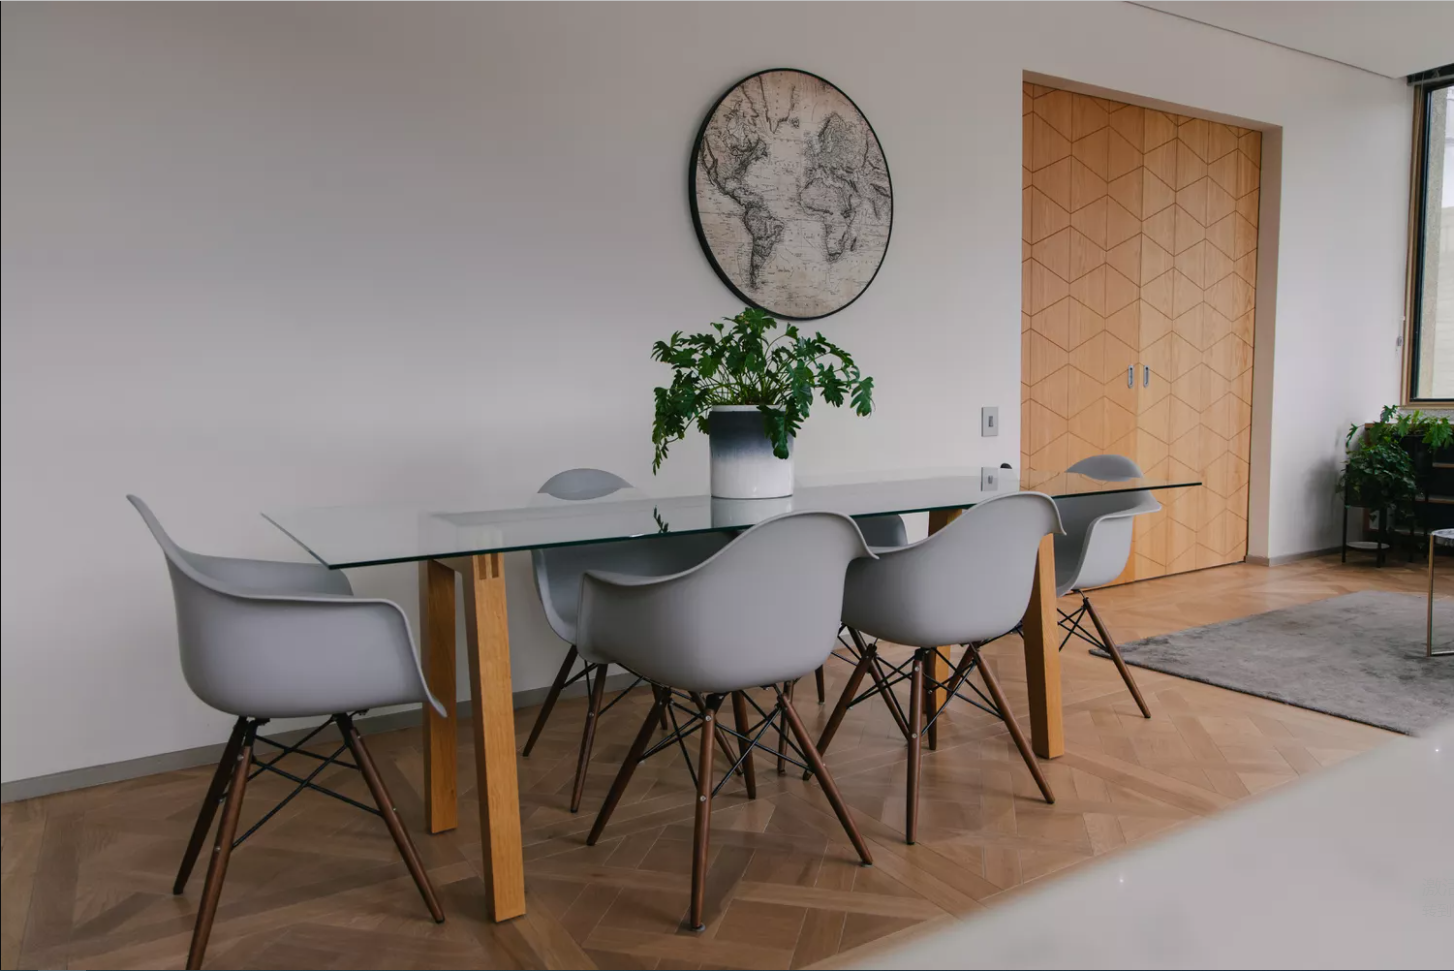 How to Apply Feng Shui to Your Dining Room